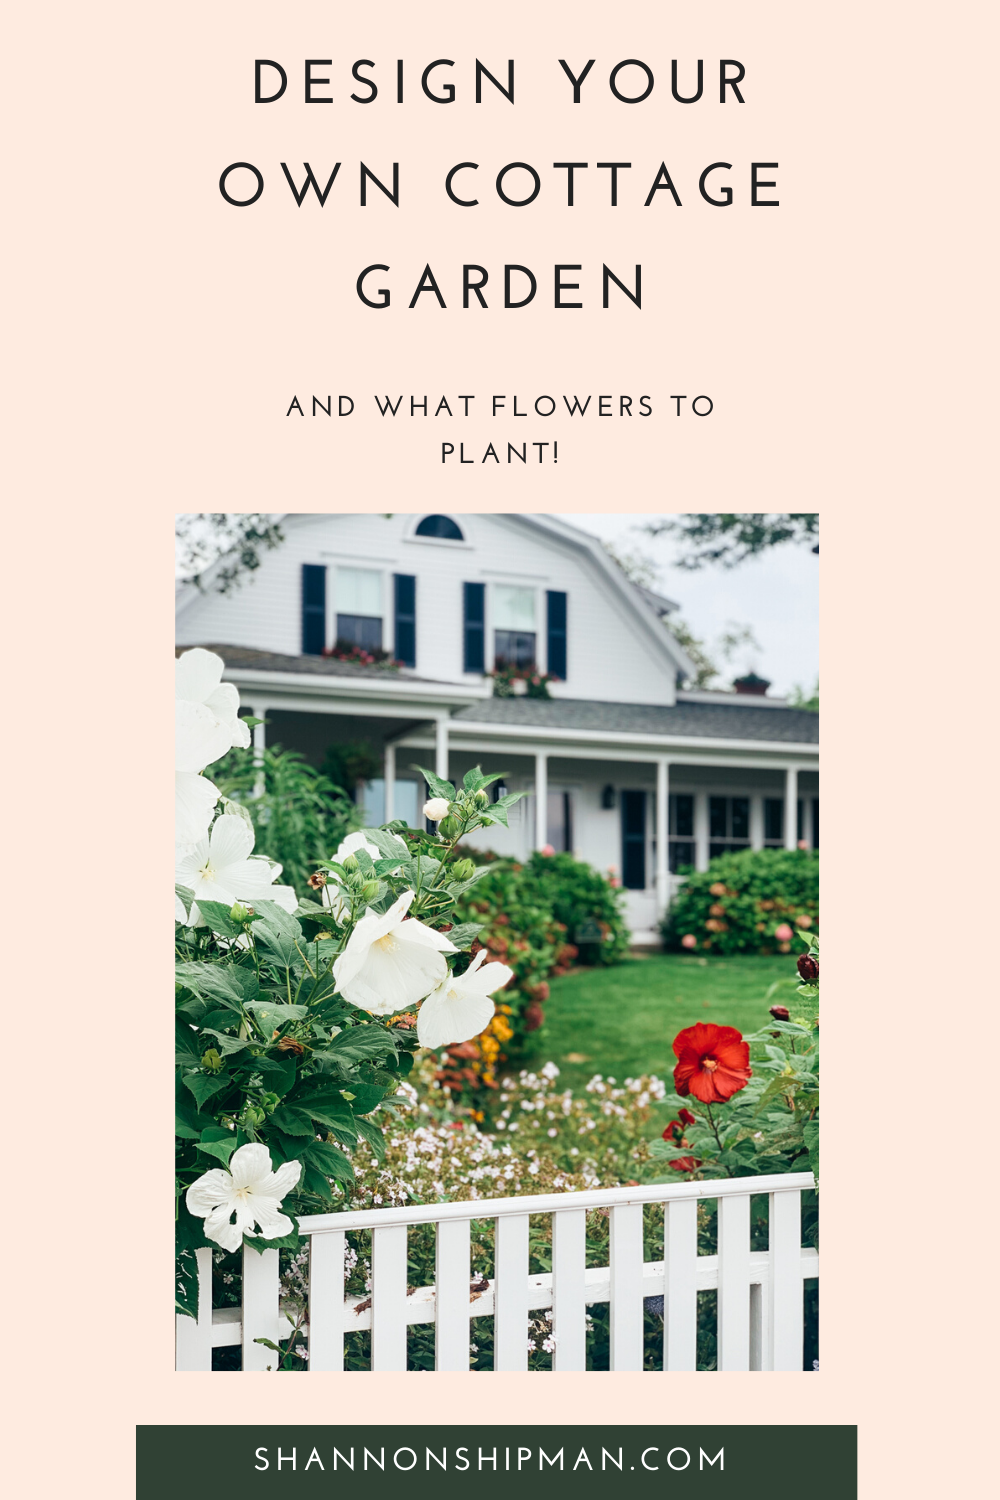 Cottage Garden Ideas by popular New England life and style blogger, Shannon Shipman: Pinterest image for cottage garden ideas. 